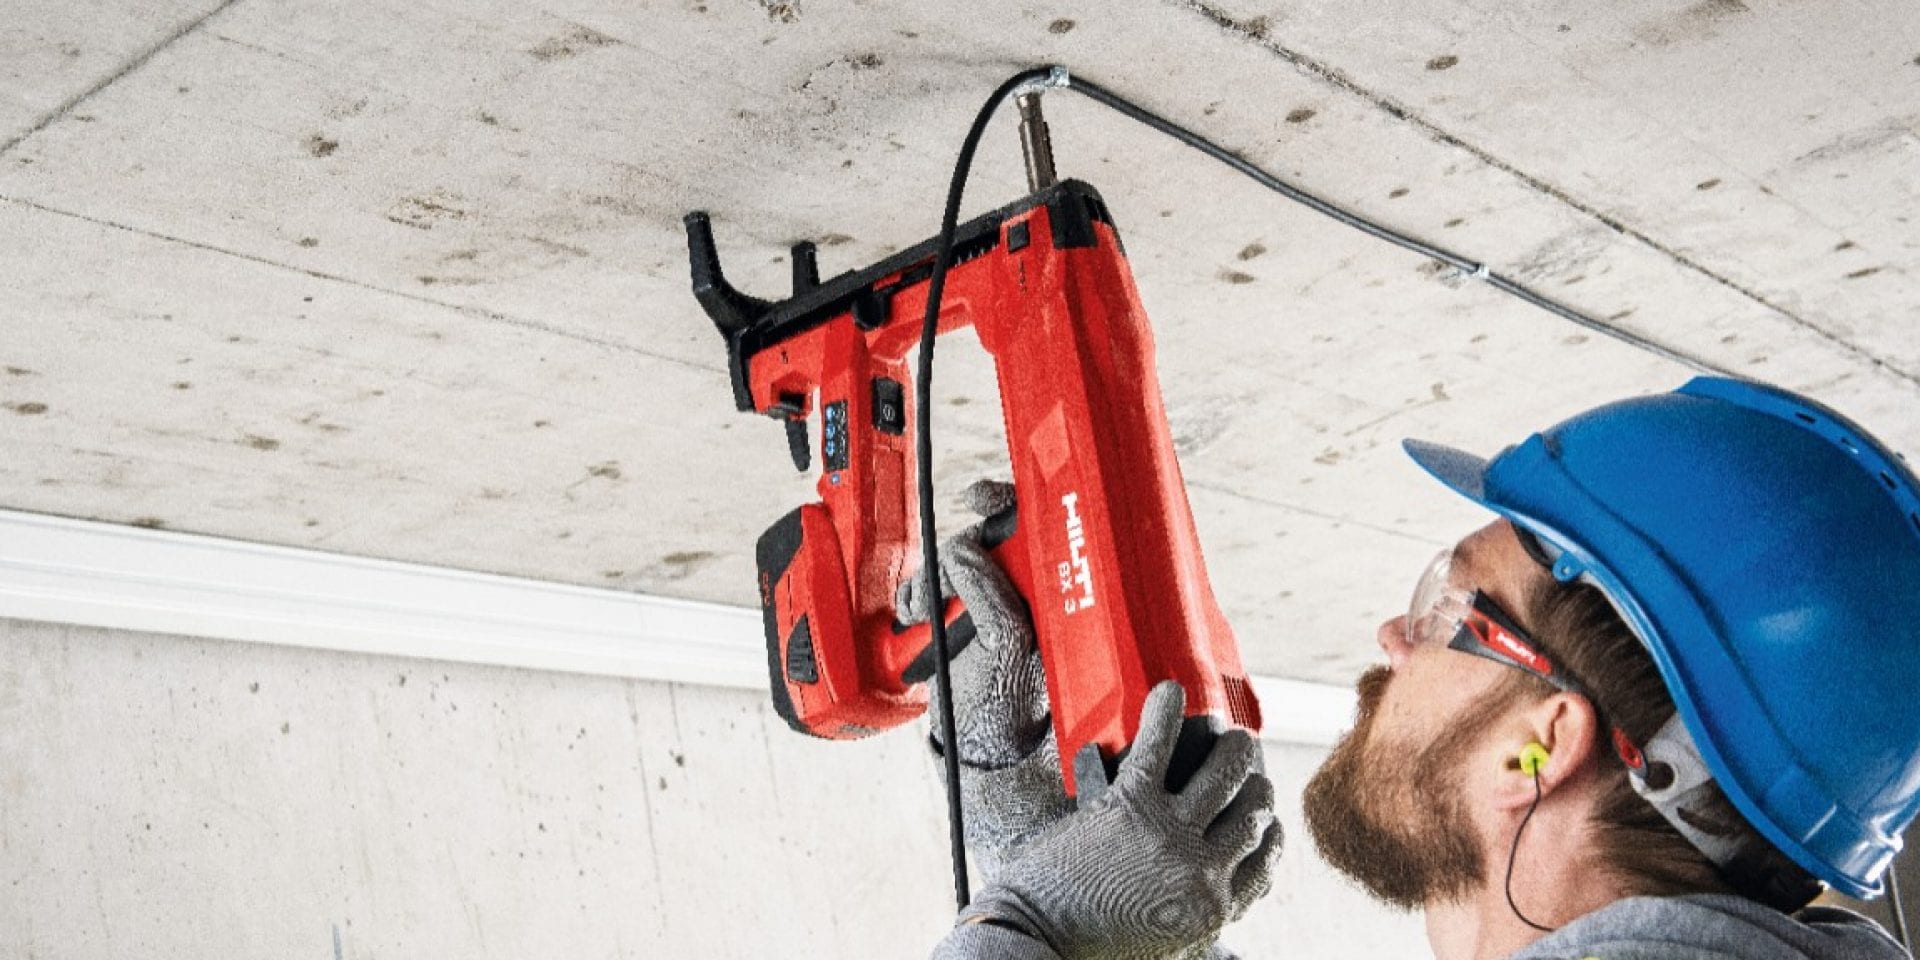 Battery-powered fastening (BX) systems are combustion-free (no powder or gas) and entirely powered by your existing 22V Lithium-ion batteries.